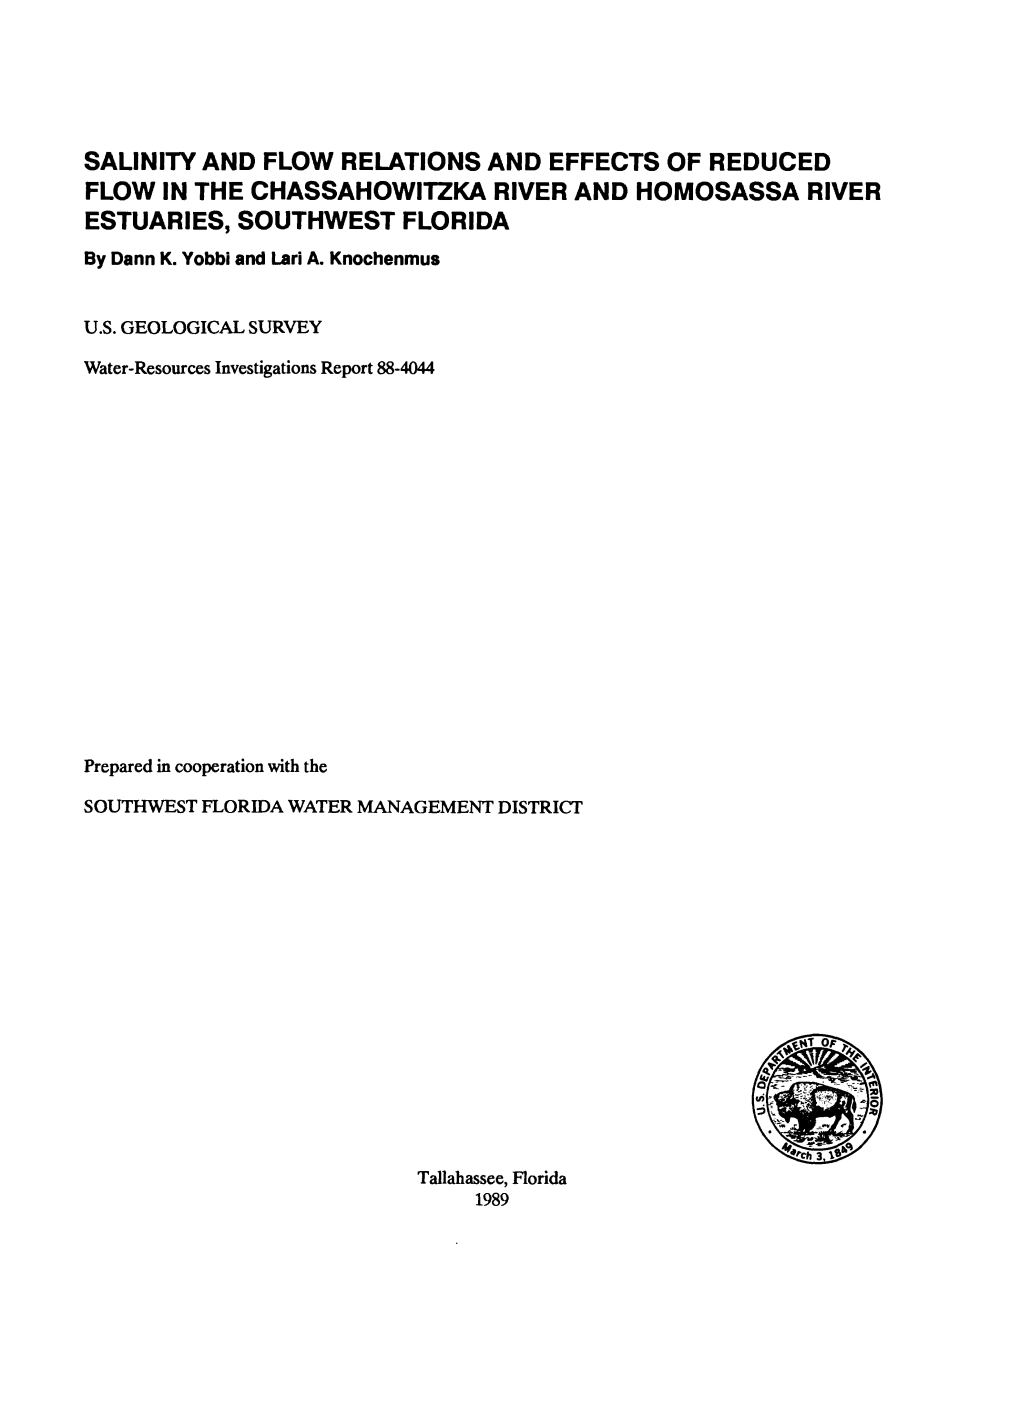 SALINITY and FLOW RELATIONS and EFFECTS of REDUCED FLOW in the CHASSAHOWITZKA RIVER and HOMOSASSA RIVER ESTUARIES, SOUTHWEST FLORIDA by Dann K